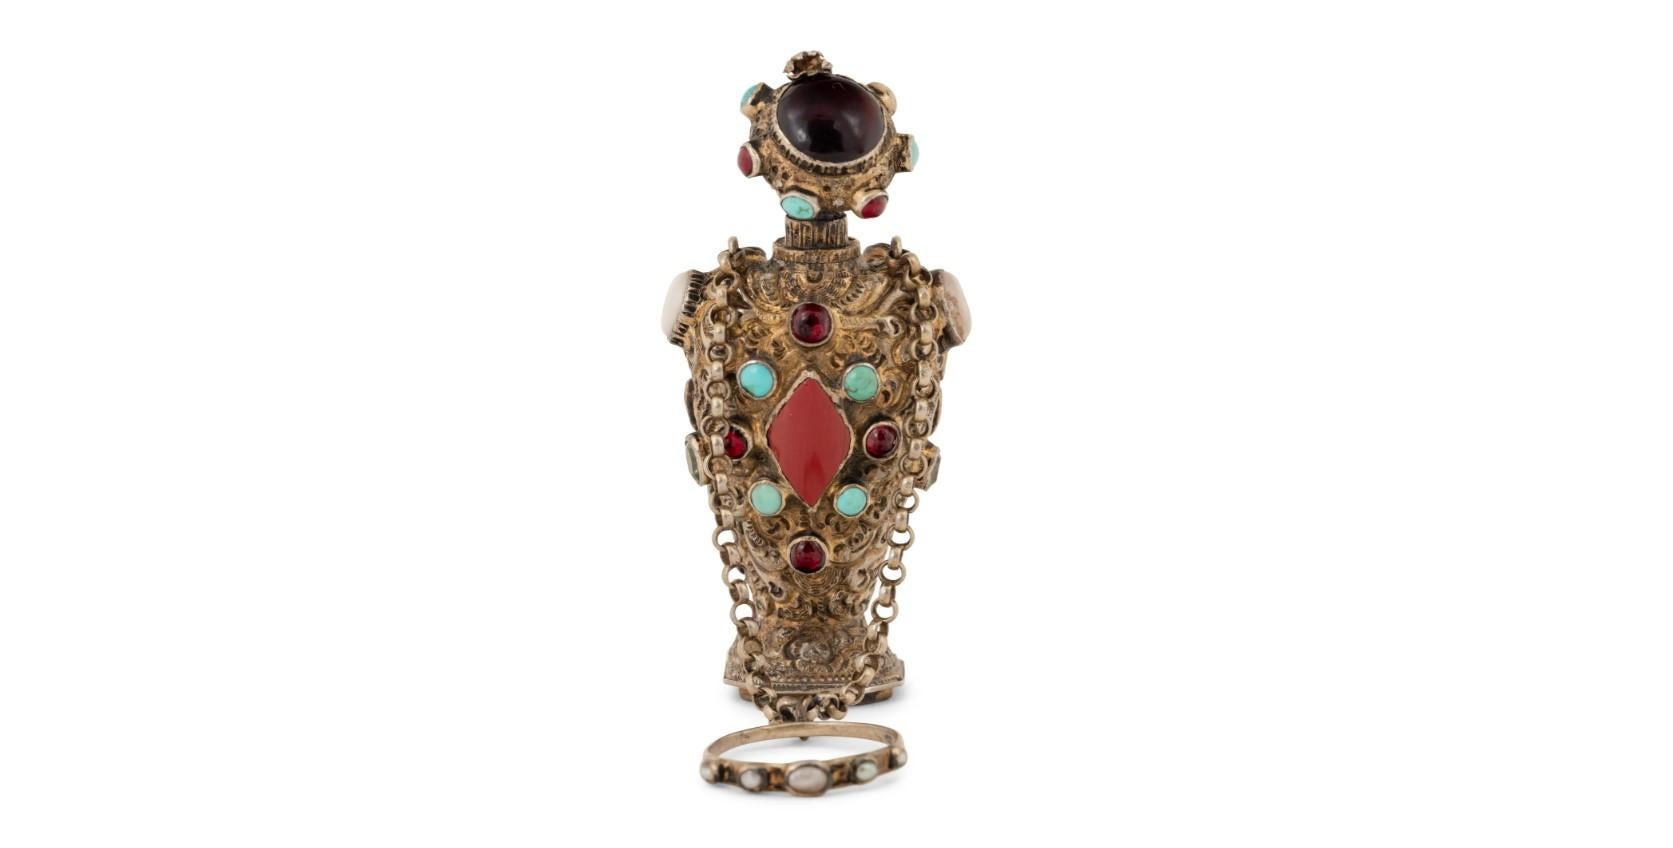 Create an air of luxury and elegance in your collection with this stunning Continental Jeweled Silver Figural Scent Bottle and Hand Seal. Crafted during the illustrious period of the 18th/19th century, this exquisite piece is sure to captivate any